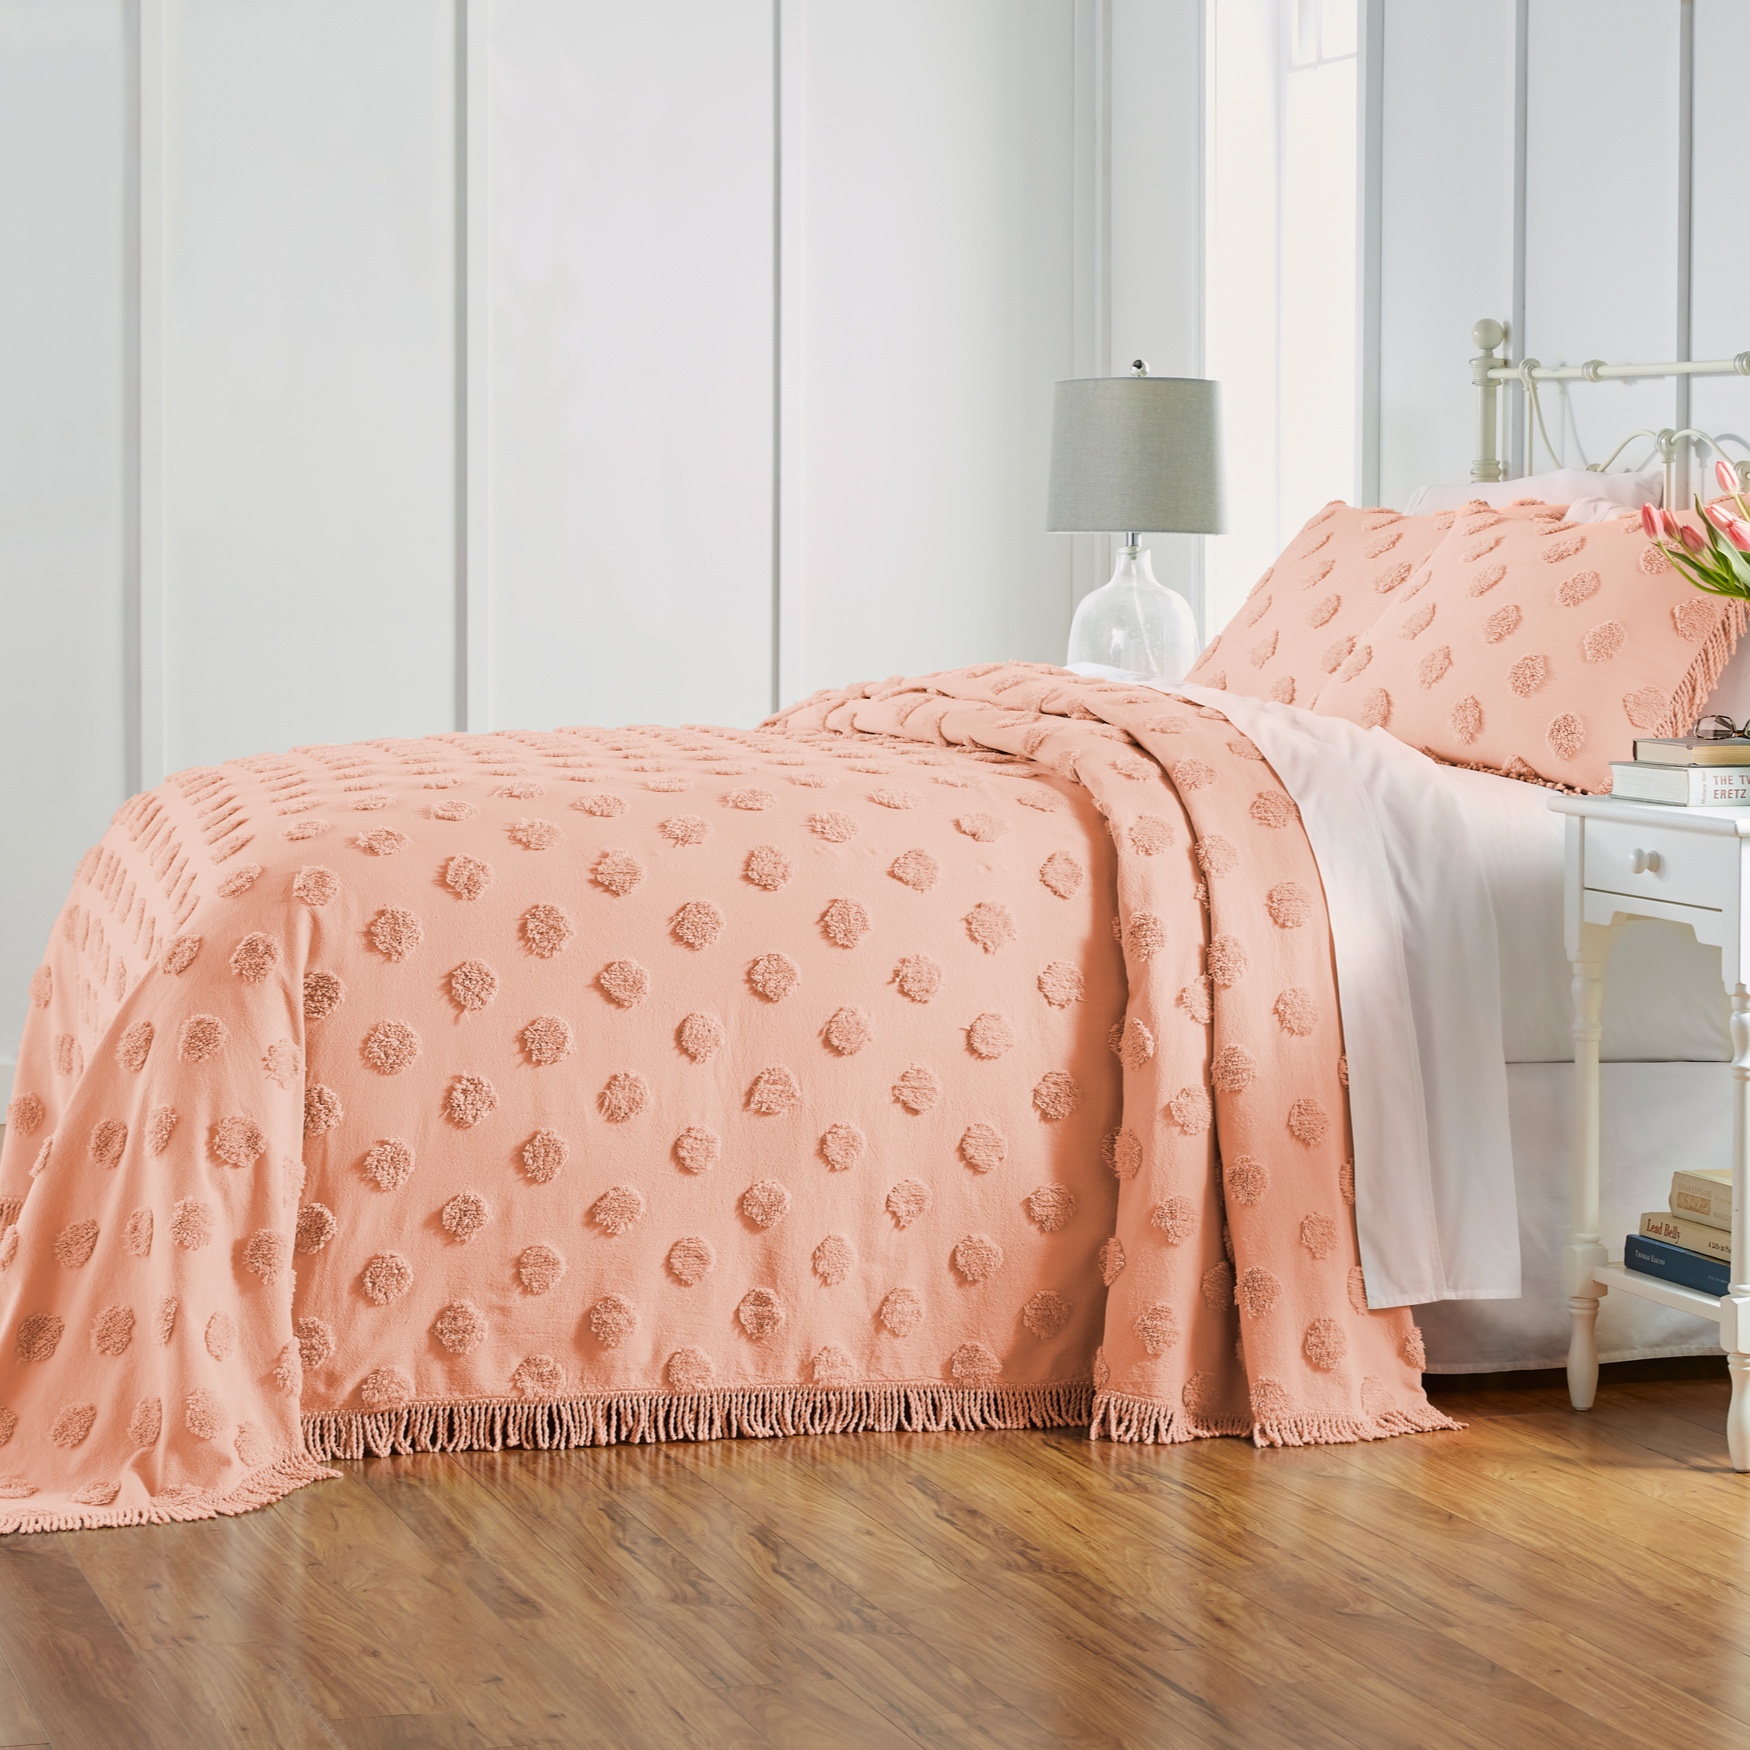 chenille bedspreads california king size